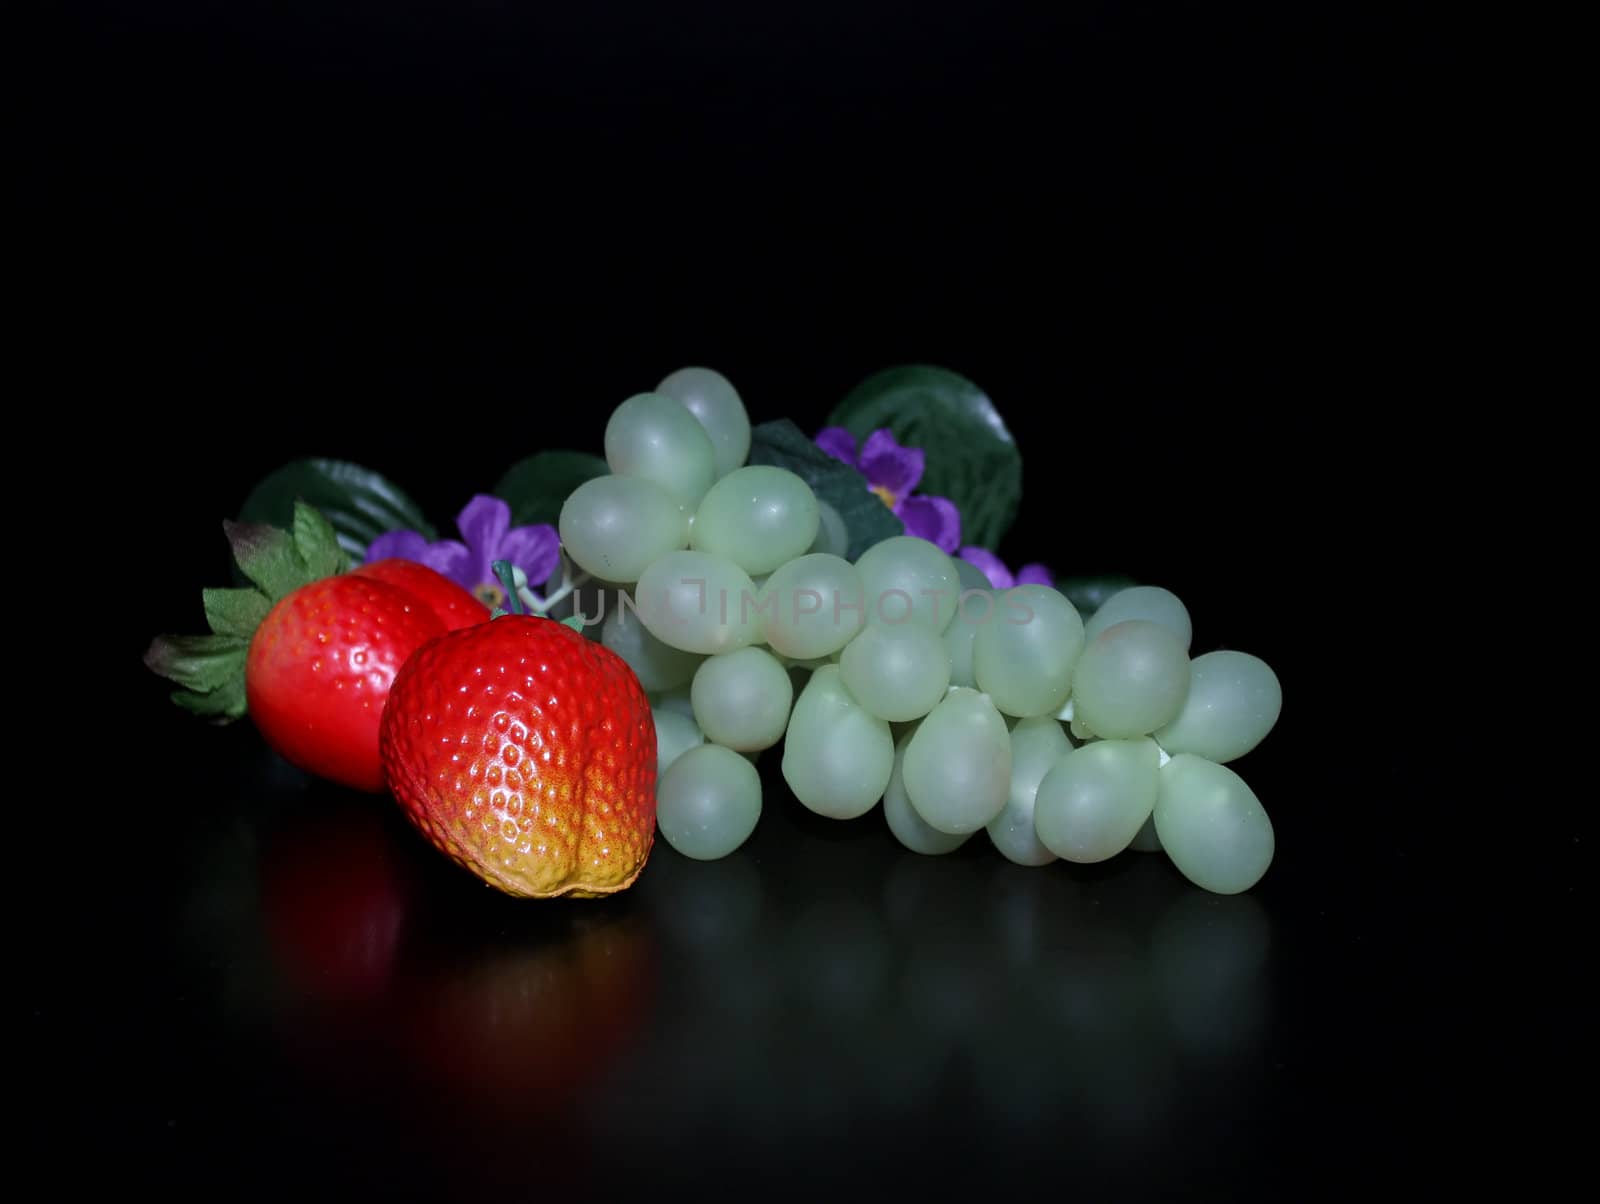 Bunch of grapes, strawberry and flowers by sergpet